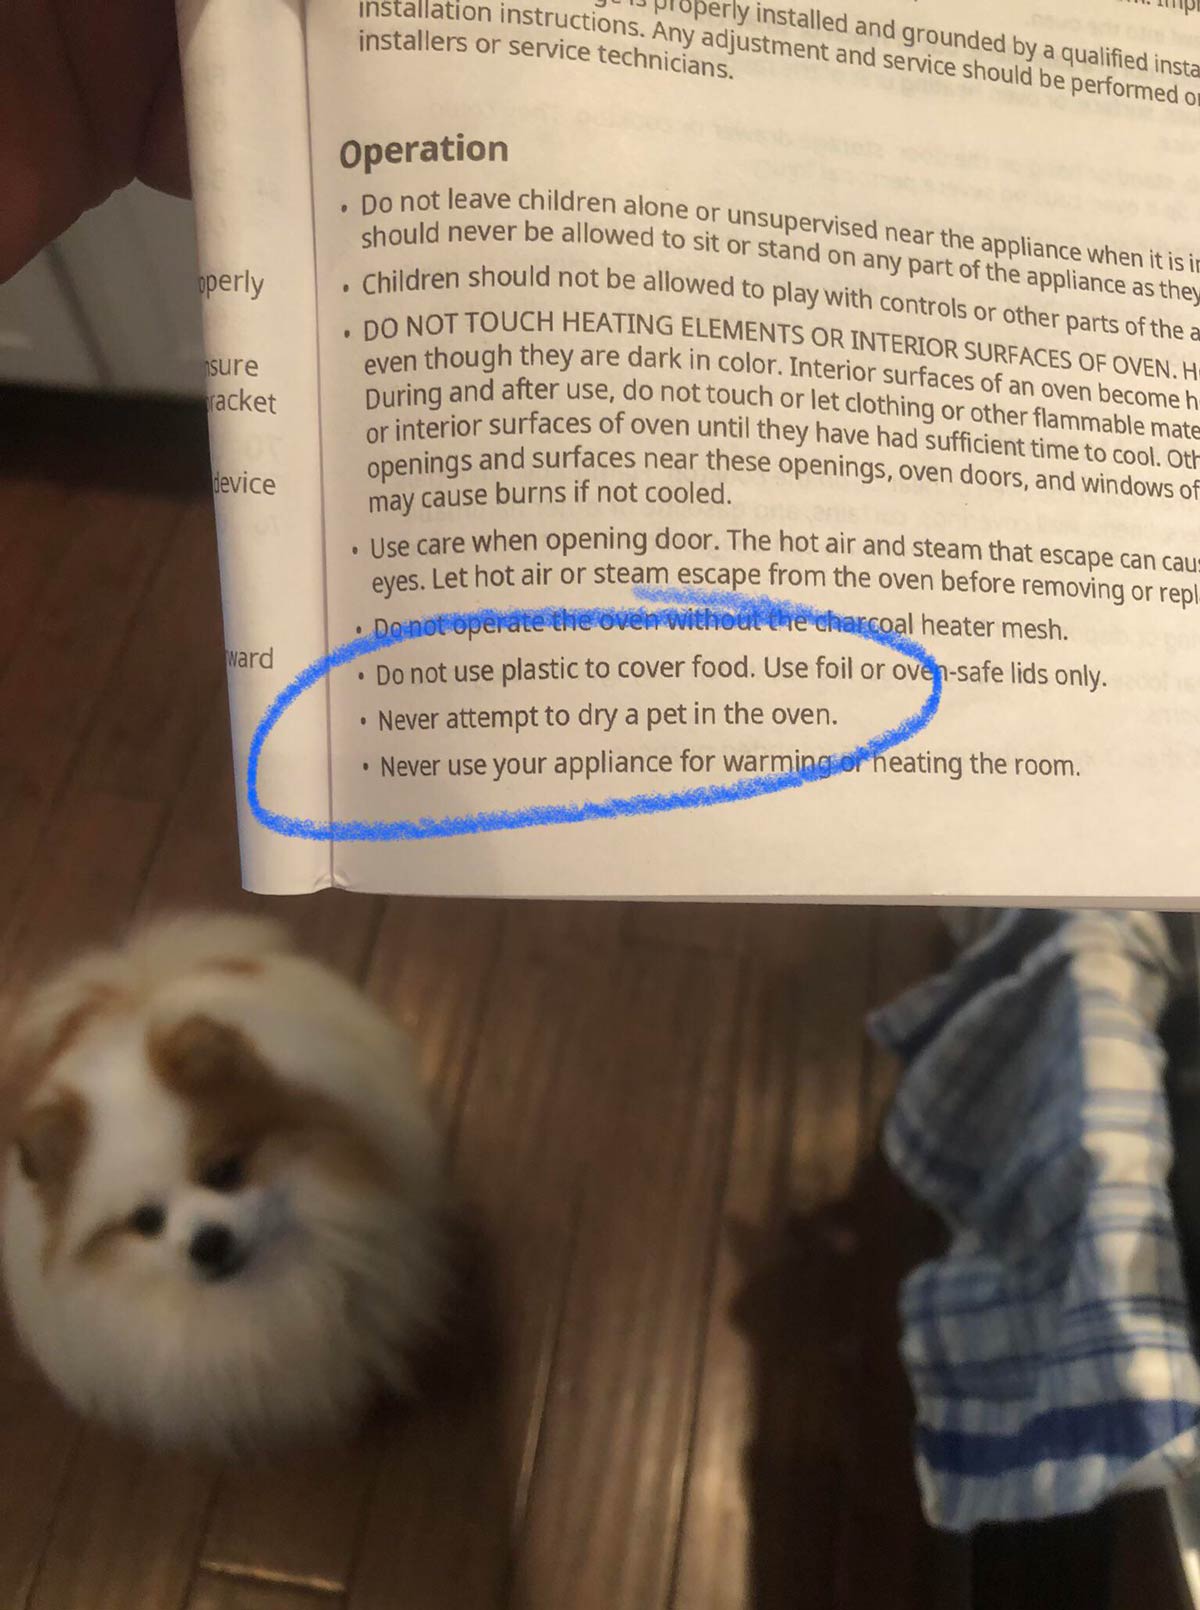 New stove, good thing I read instructions